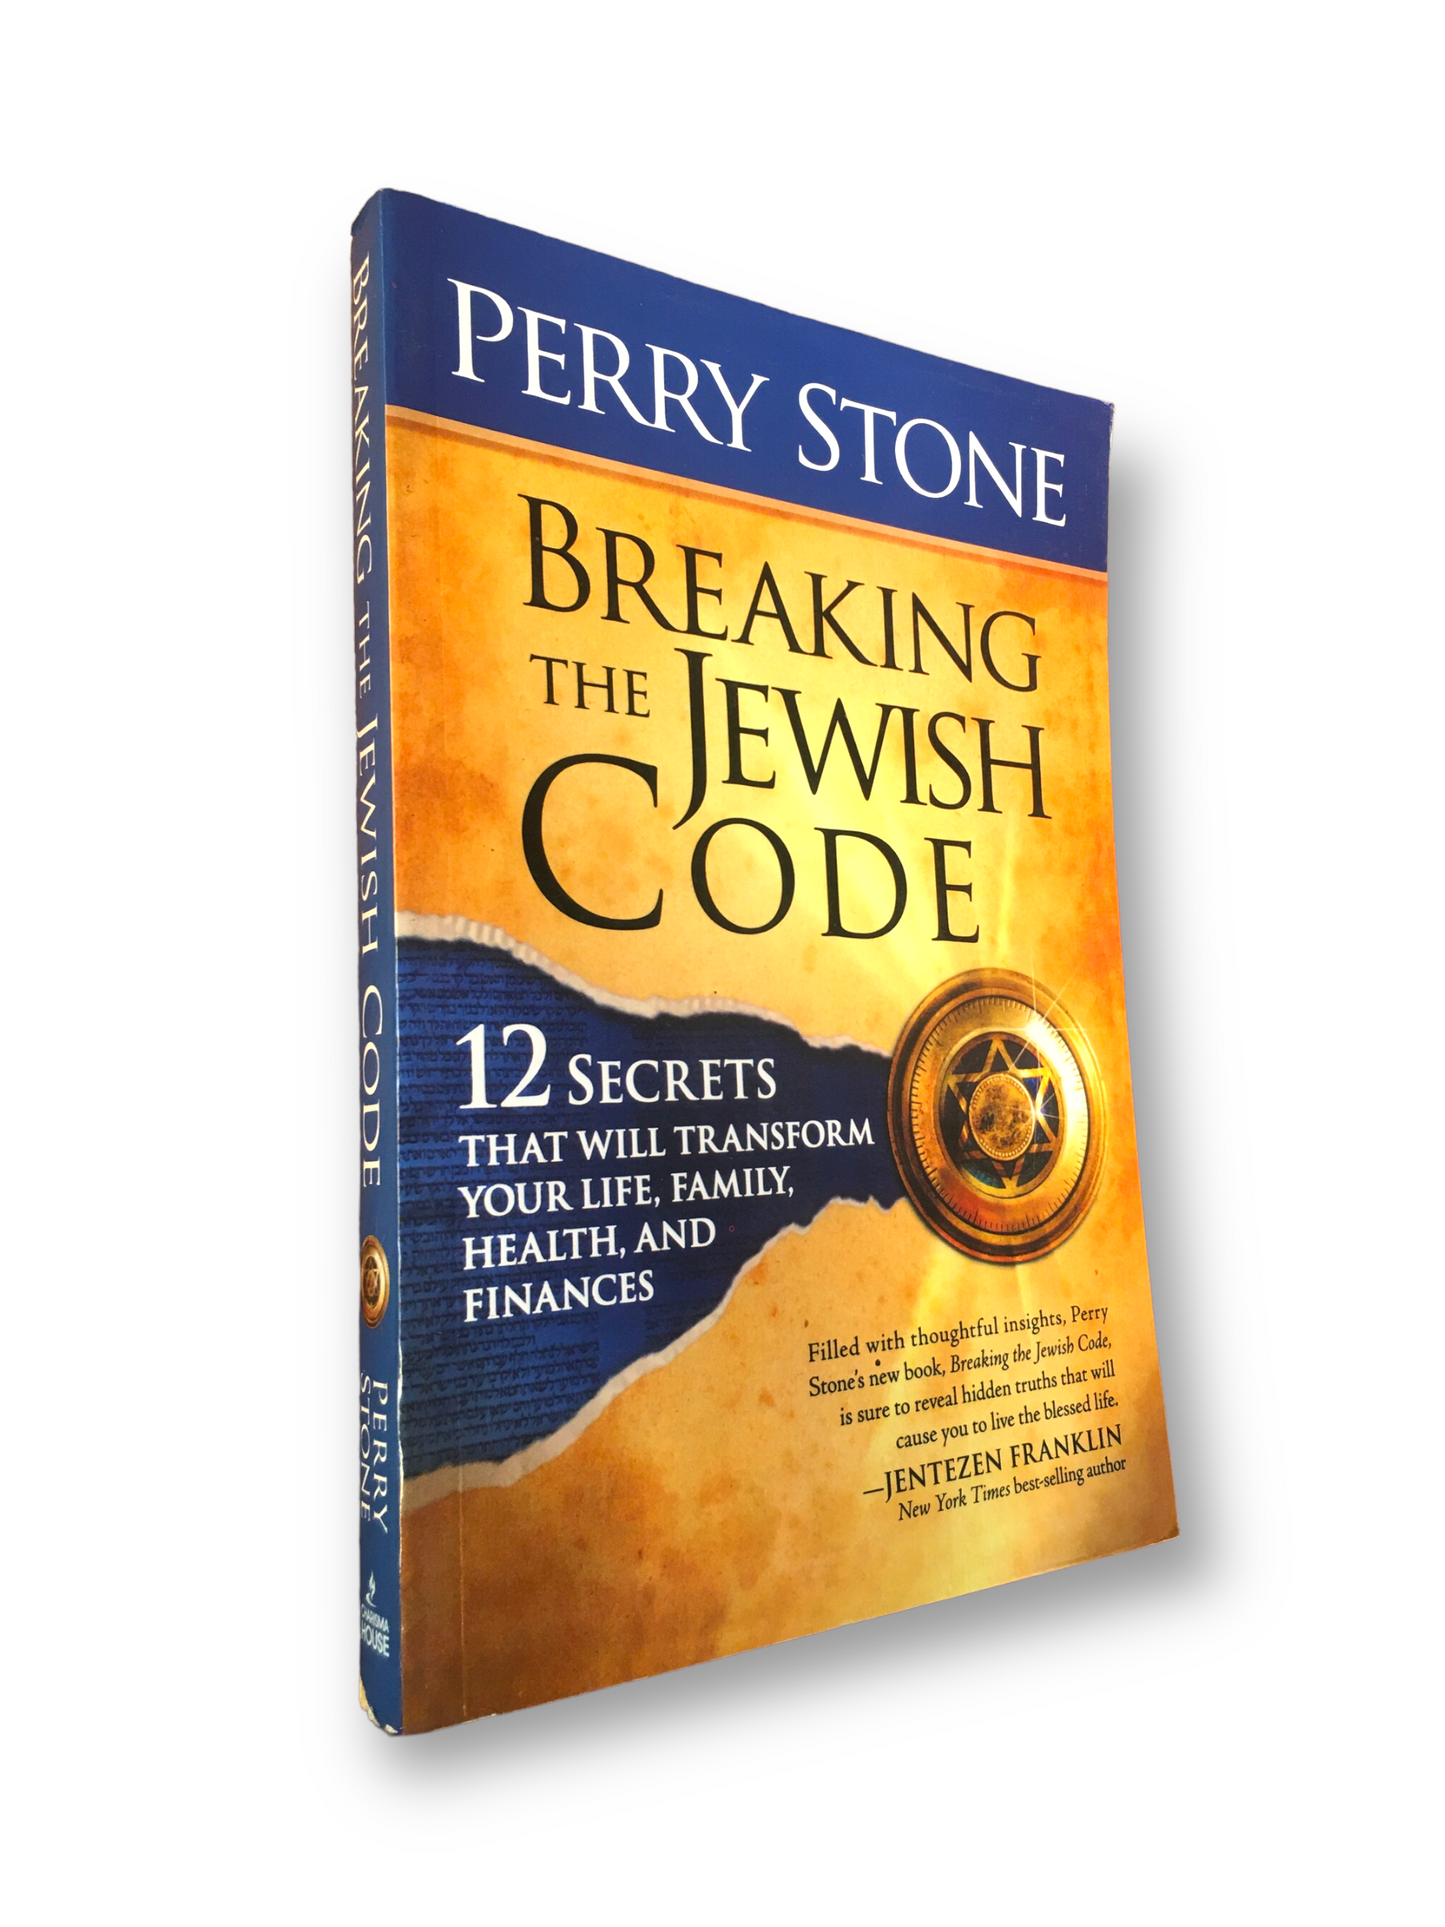 BREAKING THE JEWISH CODE  by Perry Stone